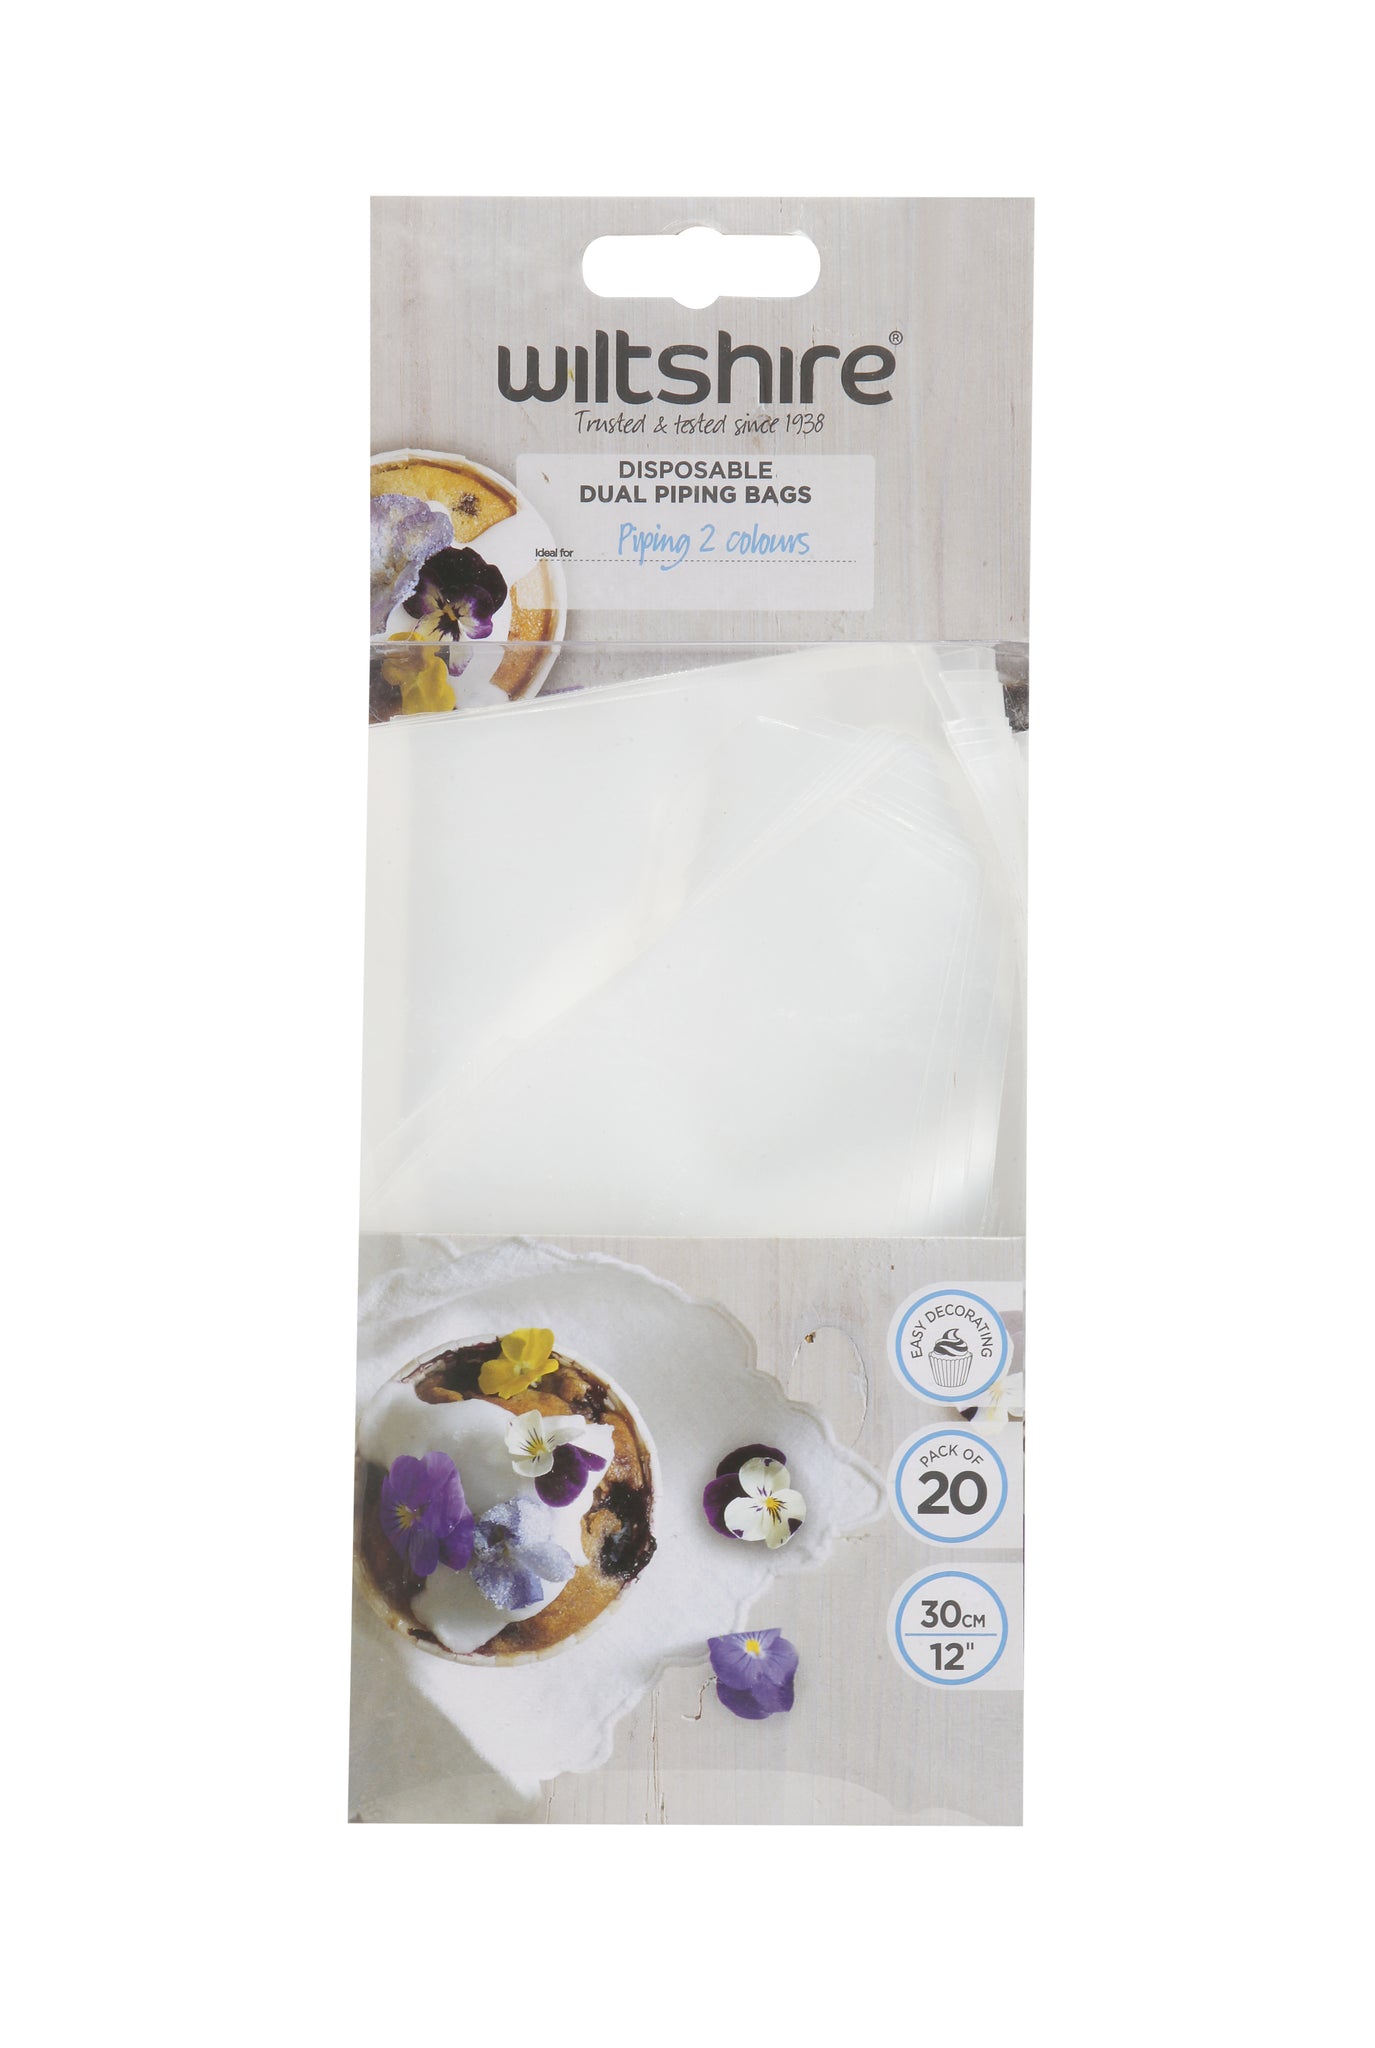 Wiltshire Disposable Dual Piping Bags Pack of 20